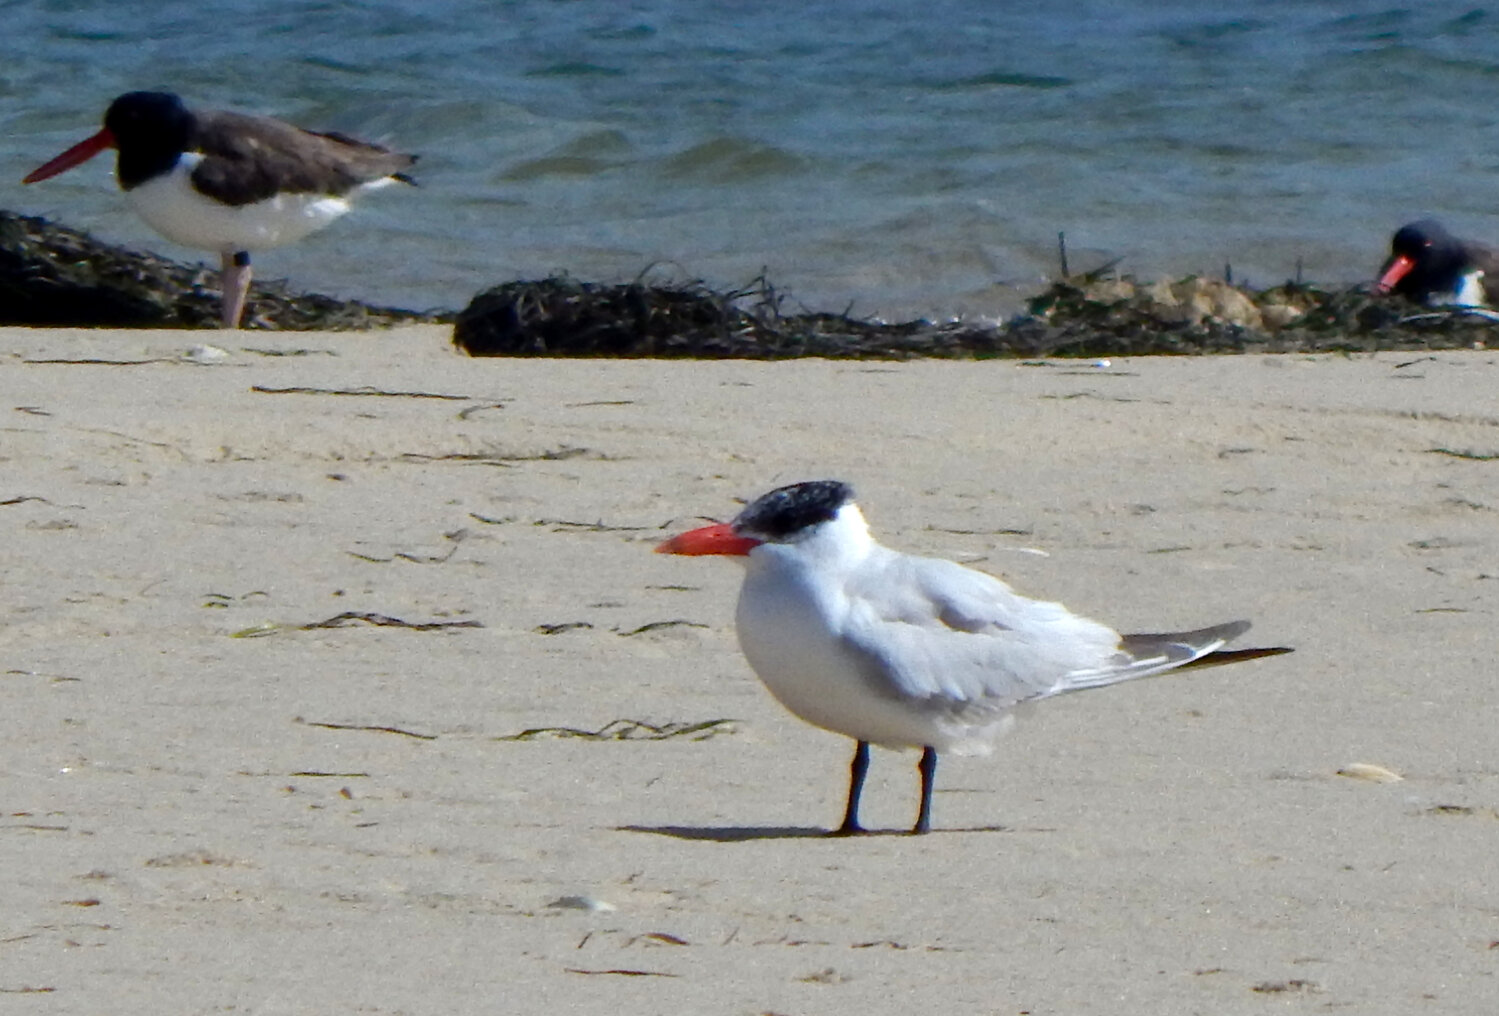 Three Caspian Terns like this one were seen together at Smith’s Point on Saturday.